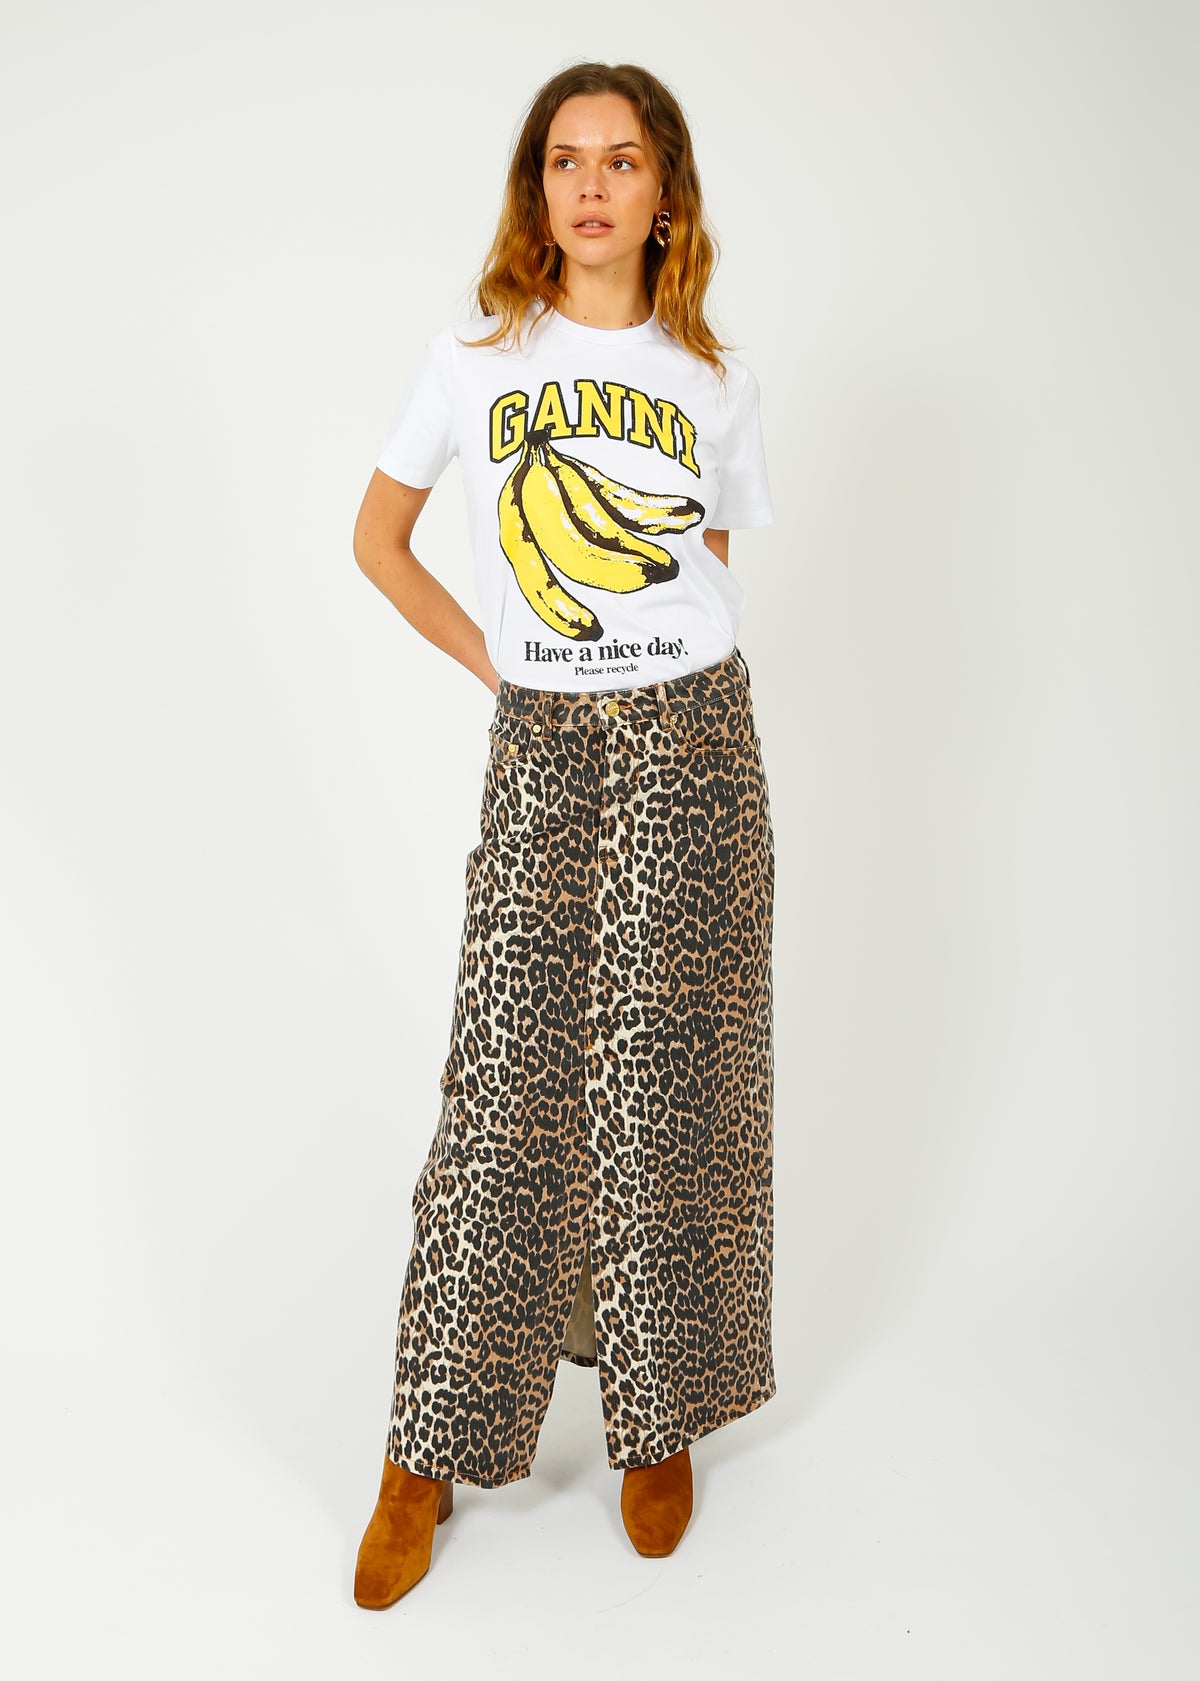 GANNI T3861 Bananas Relaxed Tee in White